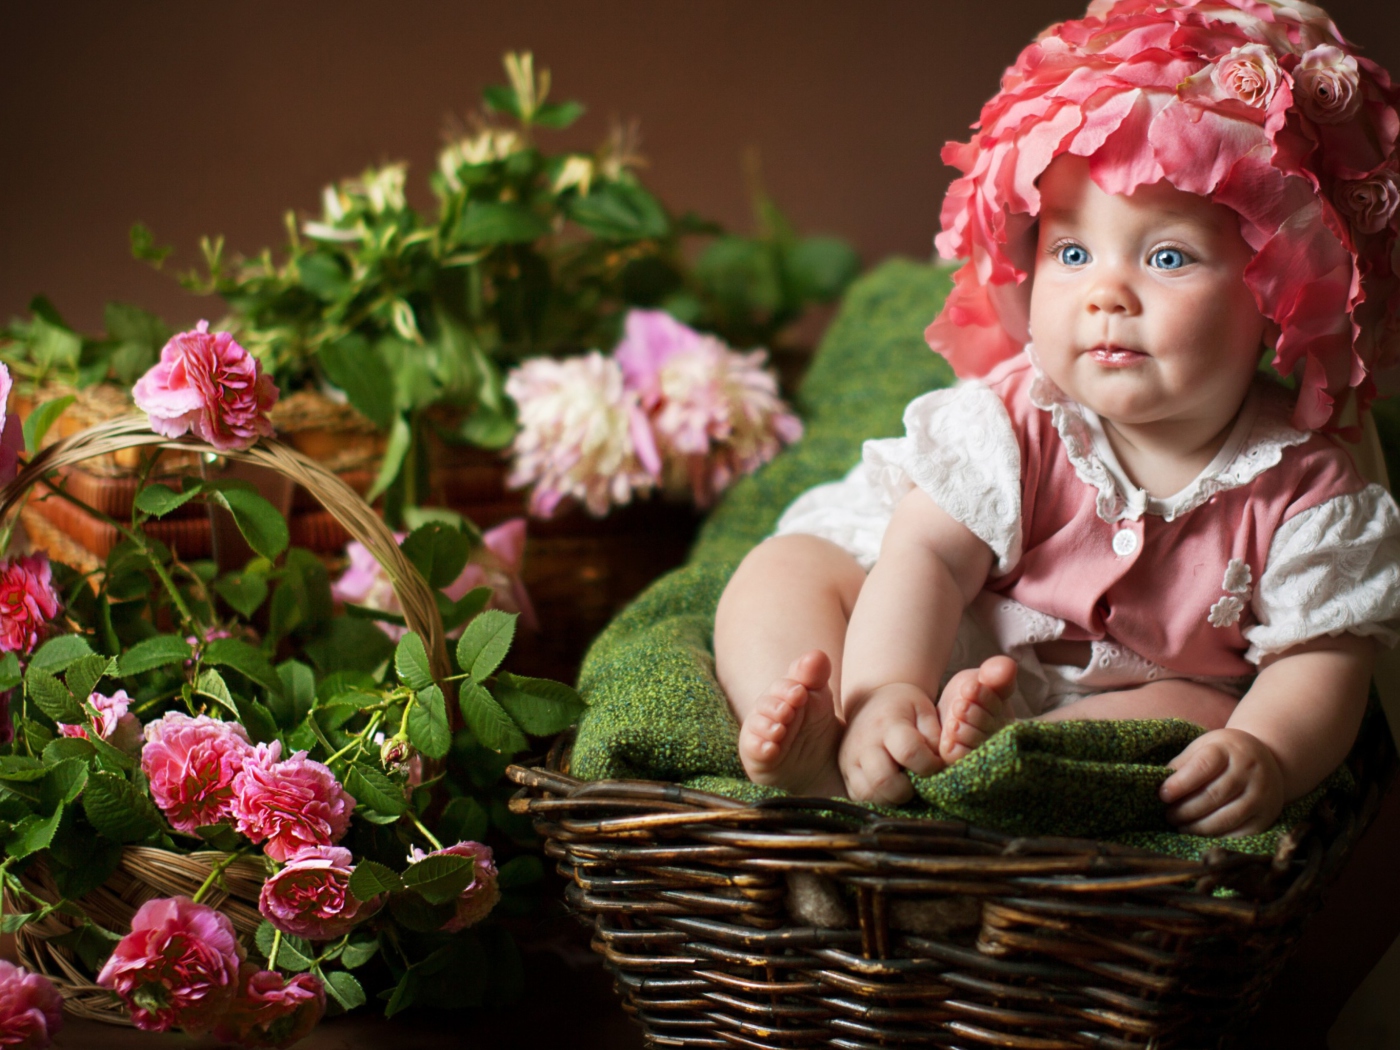 Das Cute Baby With Blue Eyes And Roses Wallpaper 1400x1050